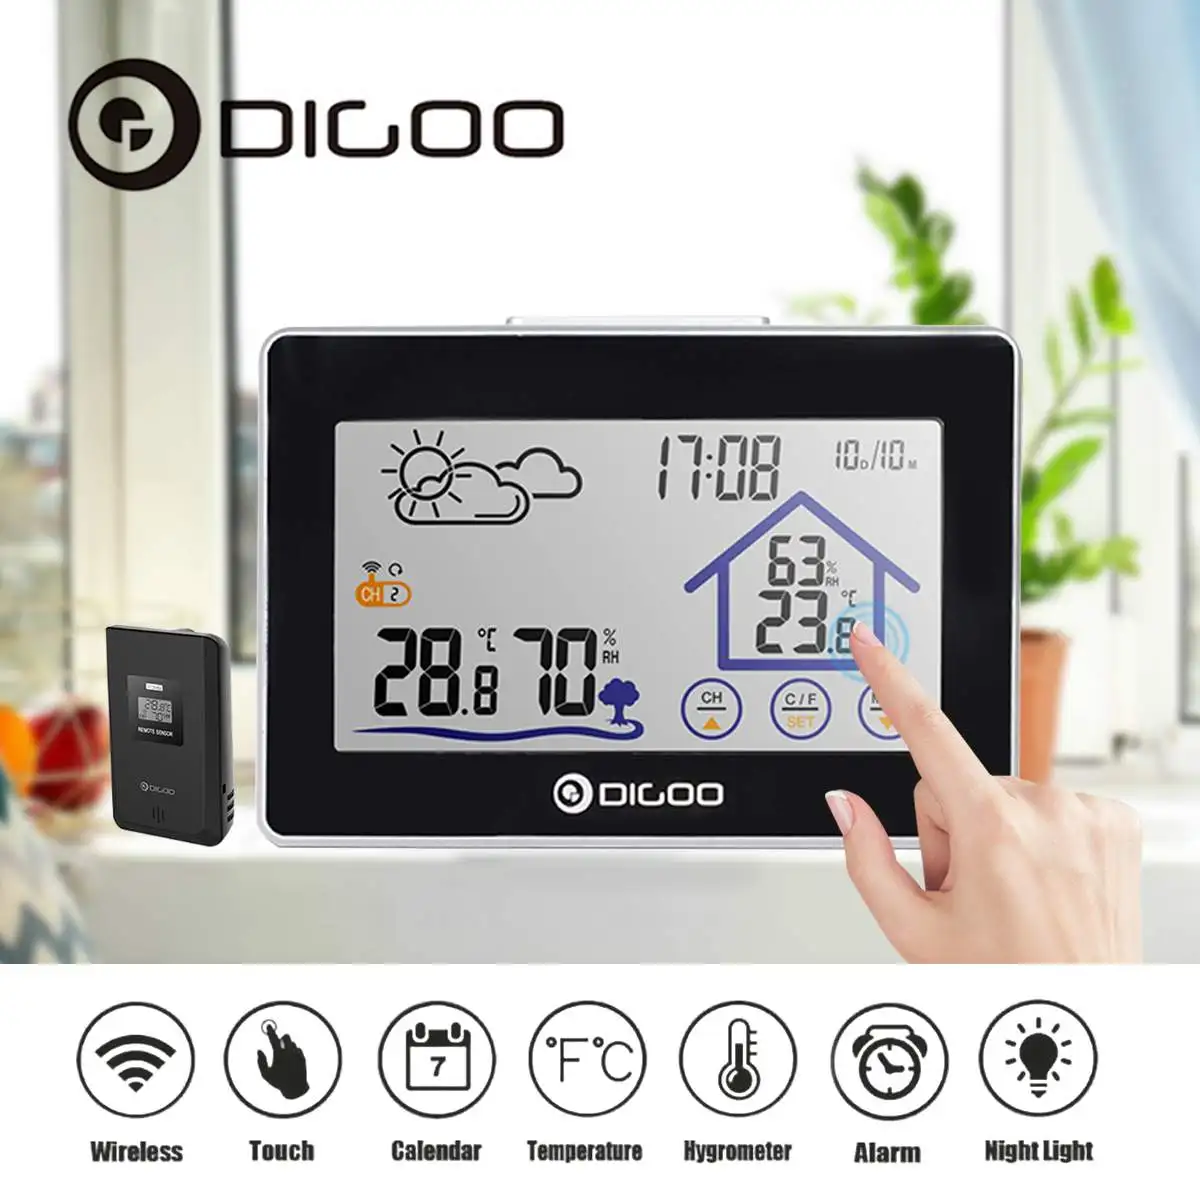 

Digoo DG-TH8380 Wireless Thermometer Hygrometer Touch Screen Weather Station With Thermometer Outdoor Forecast Sensor Clock